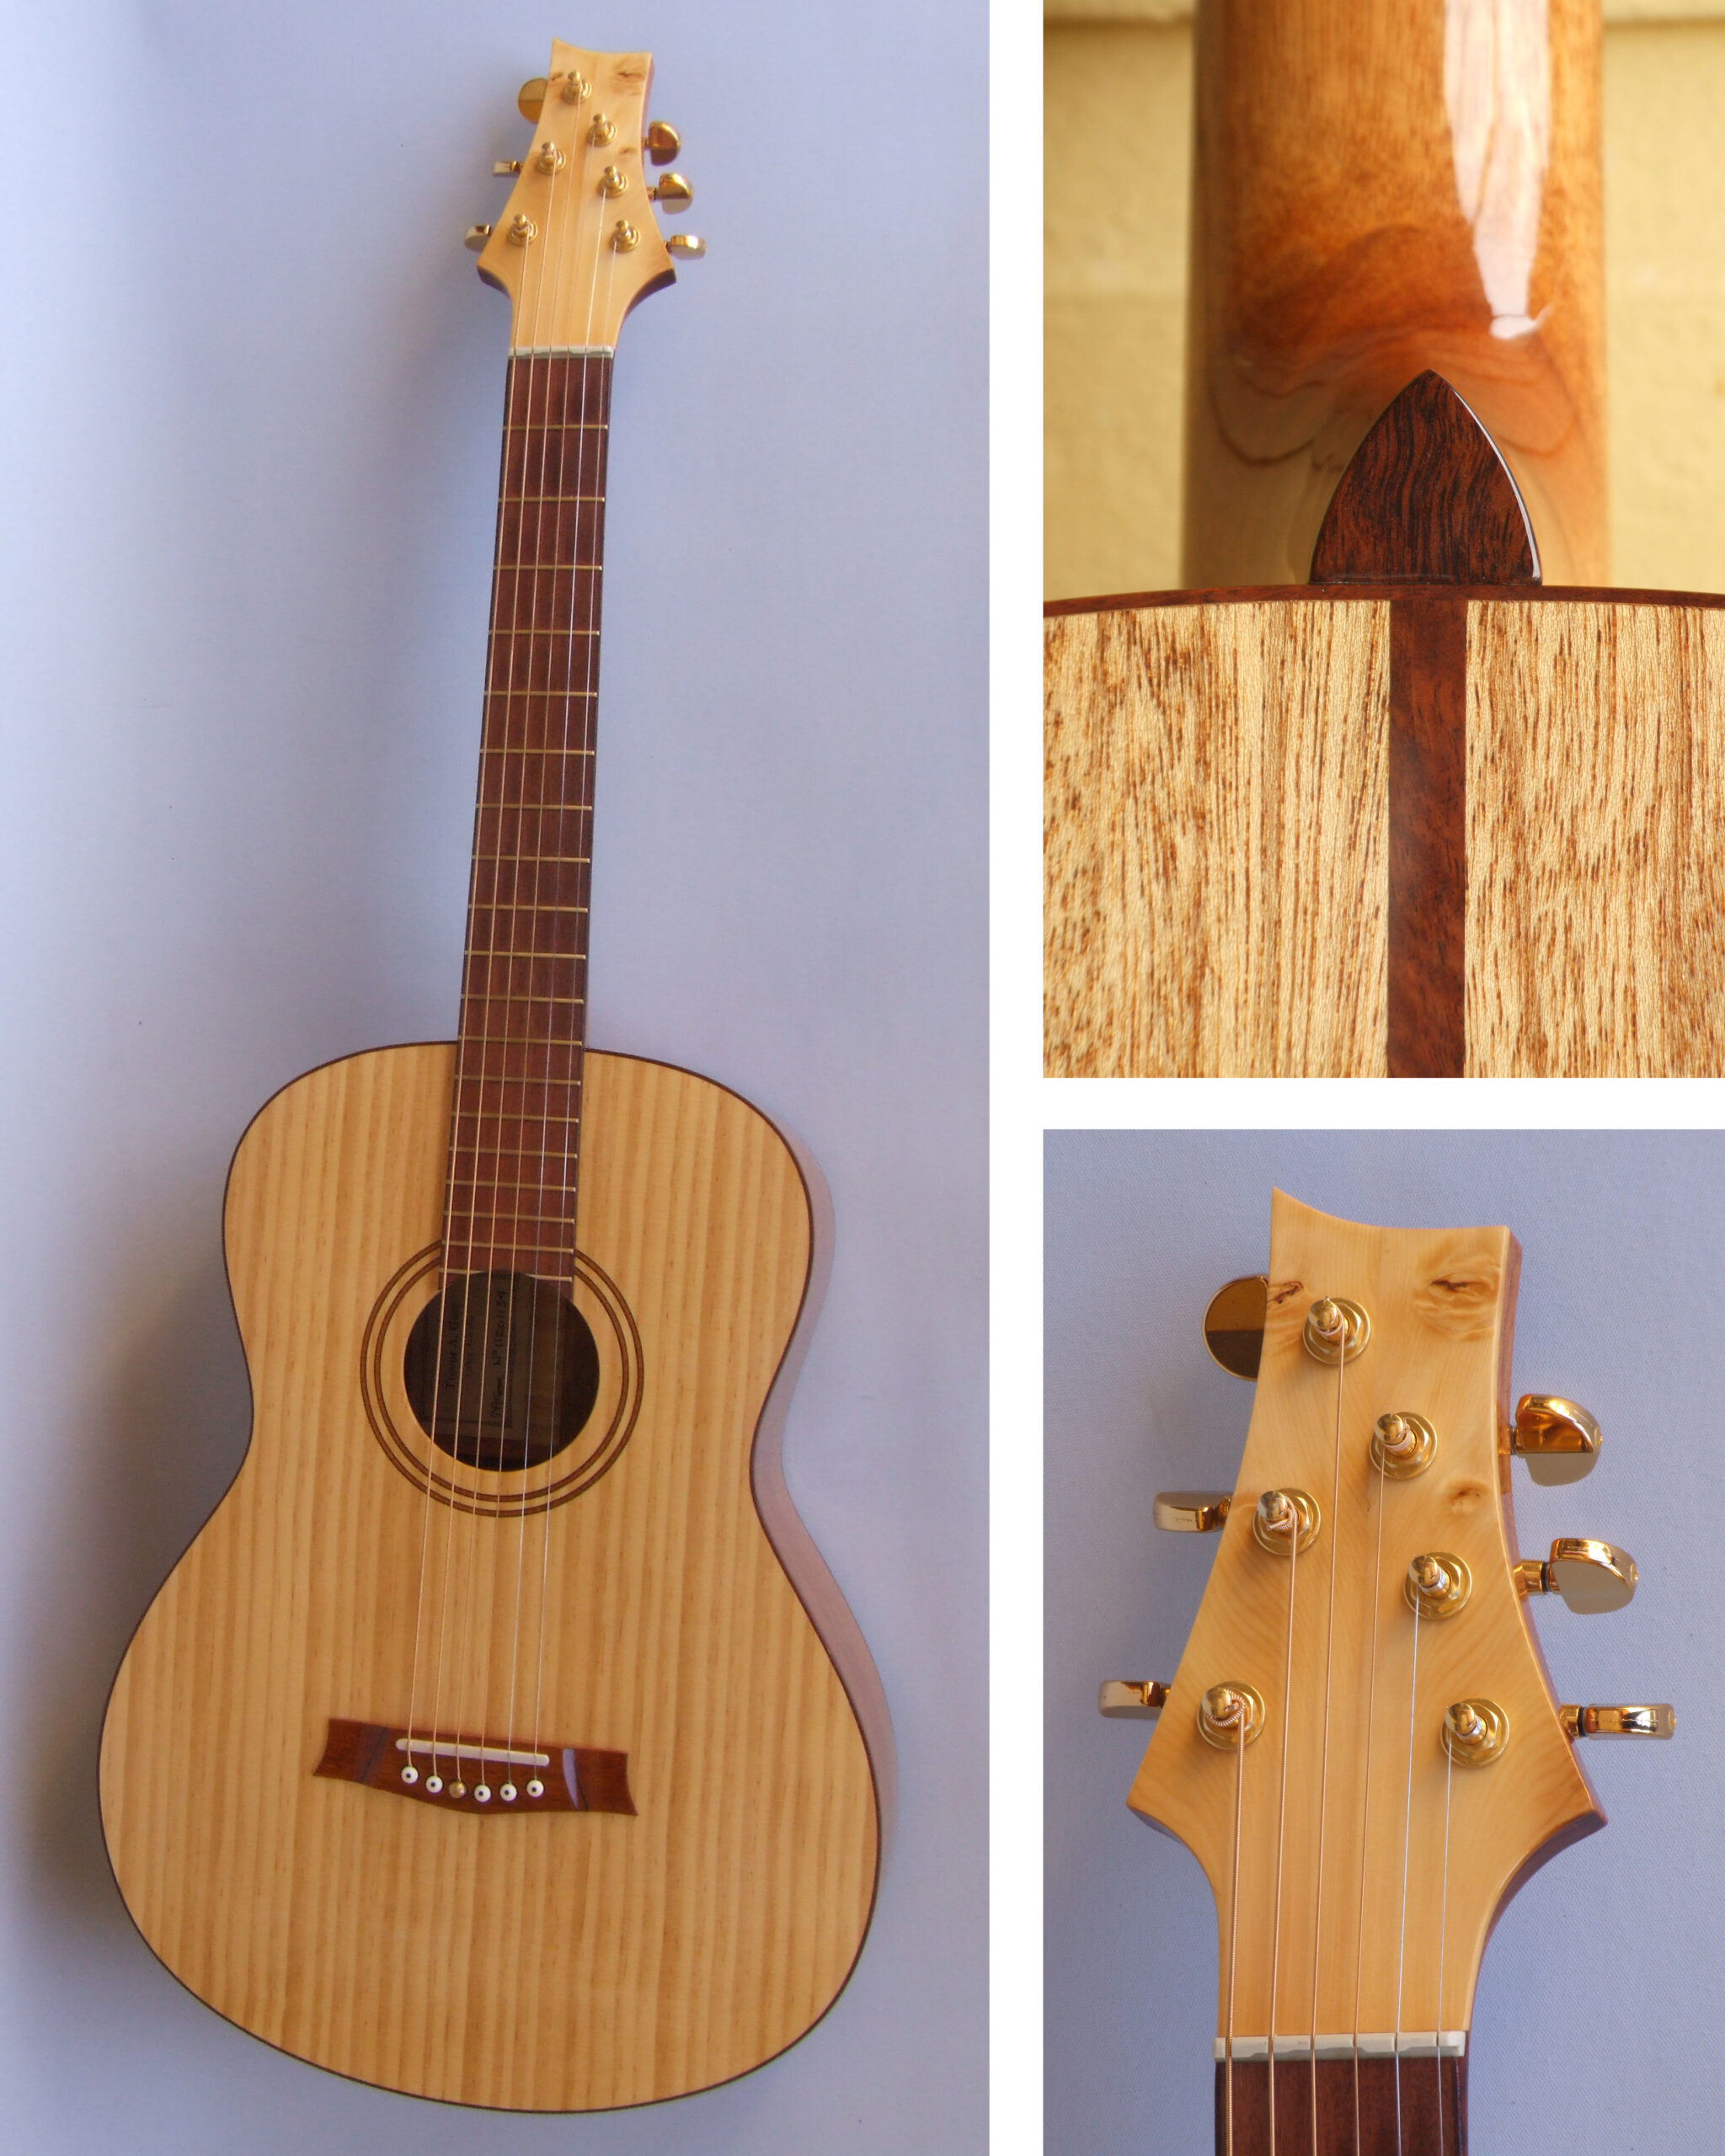 Custom guitars. Collage of The Shed guitar, showing heel, headstock and full guitar